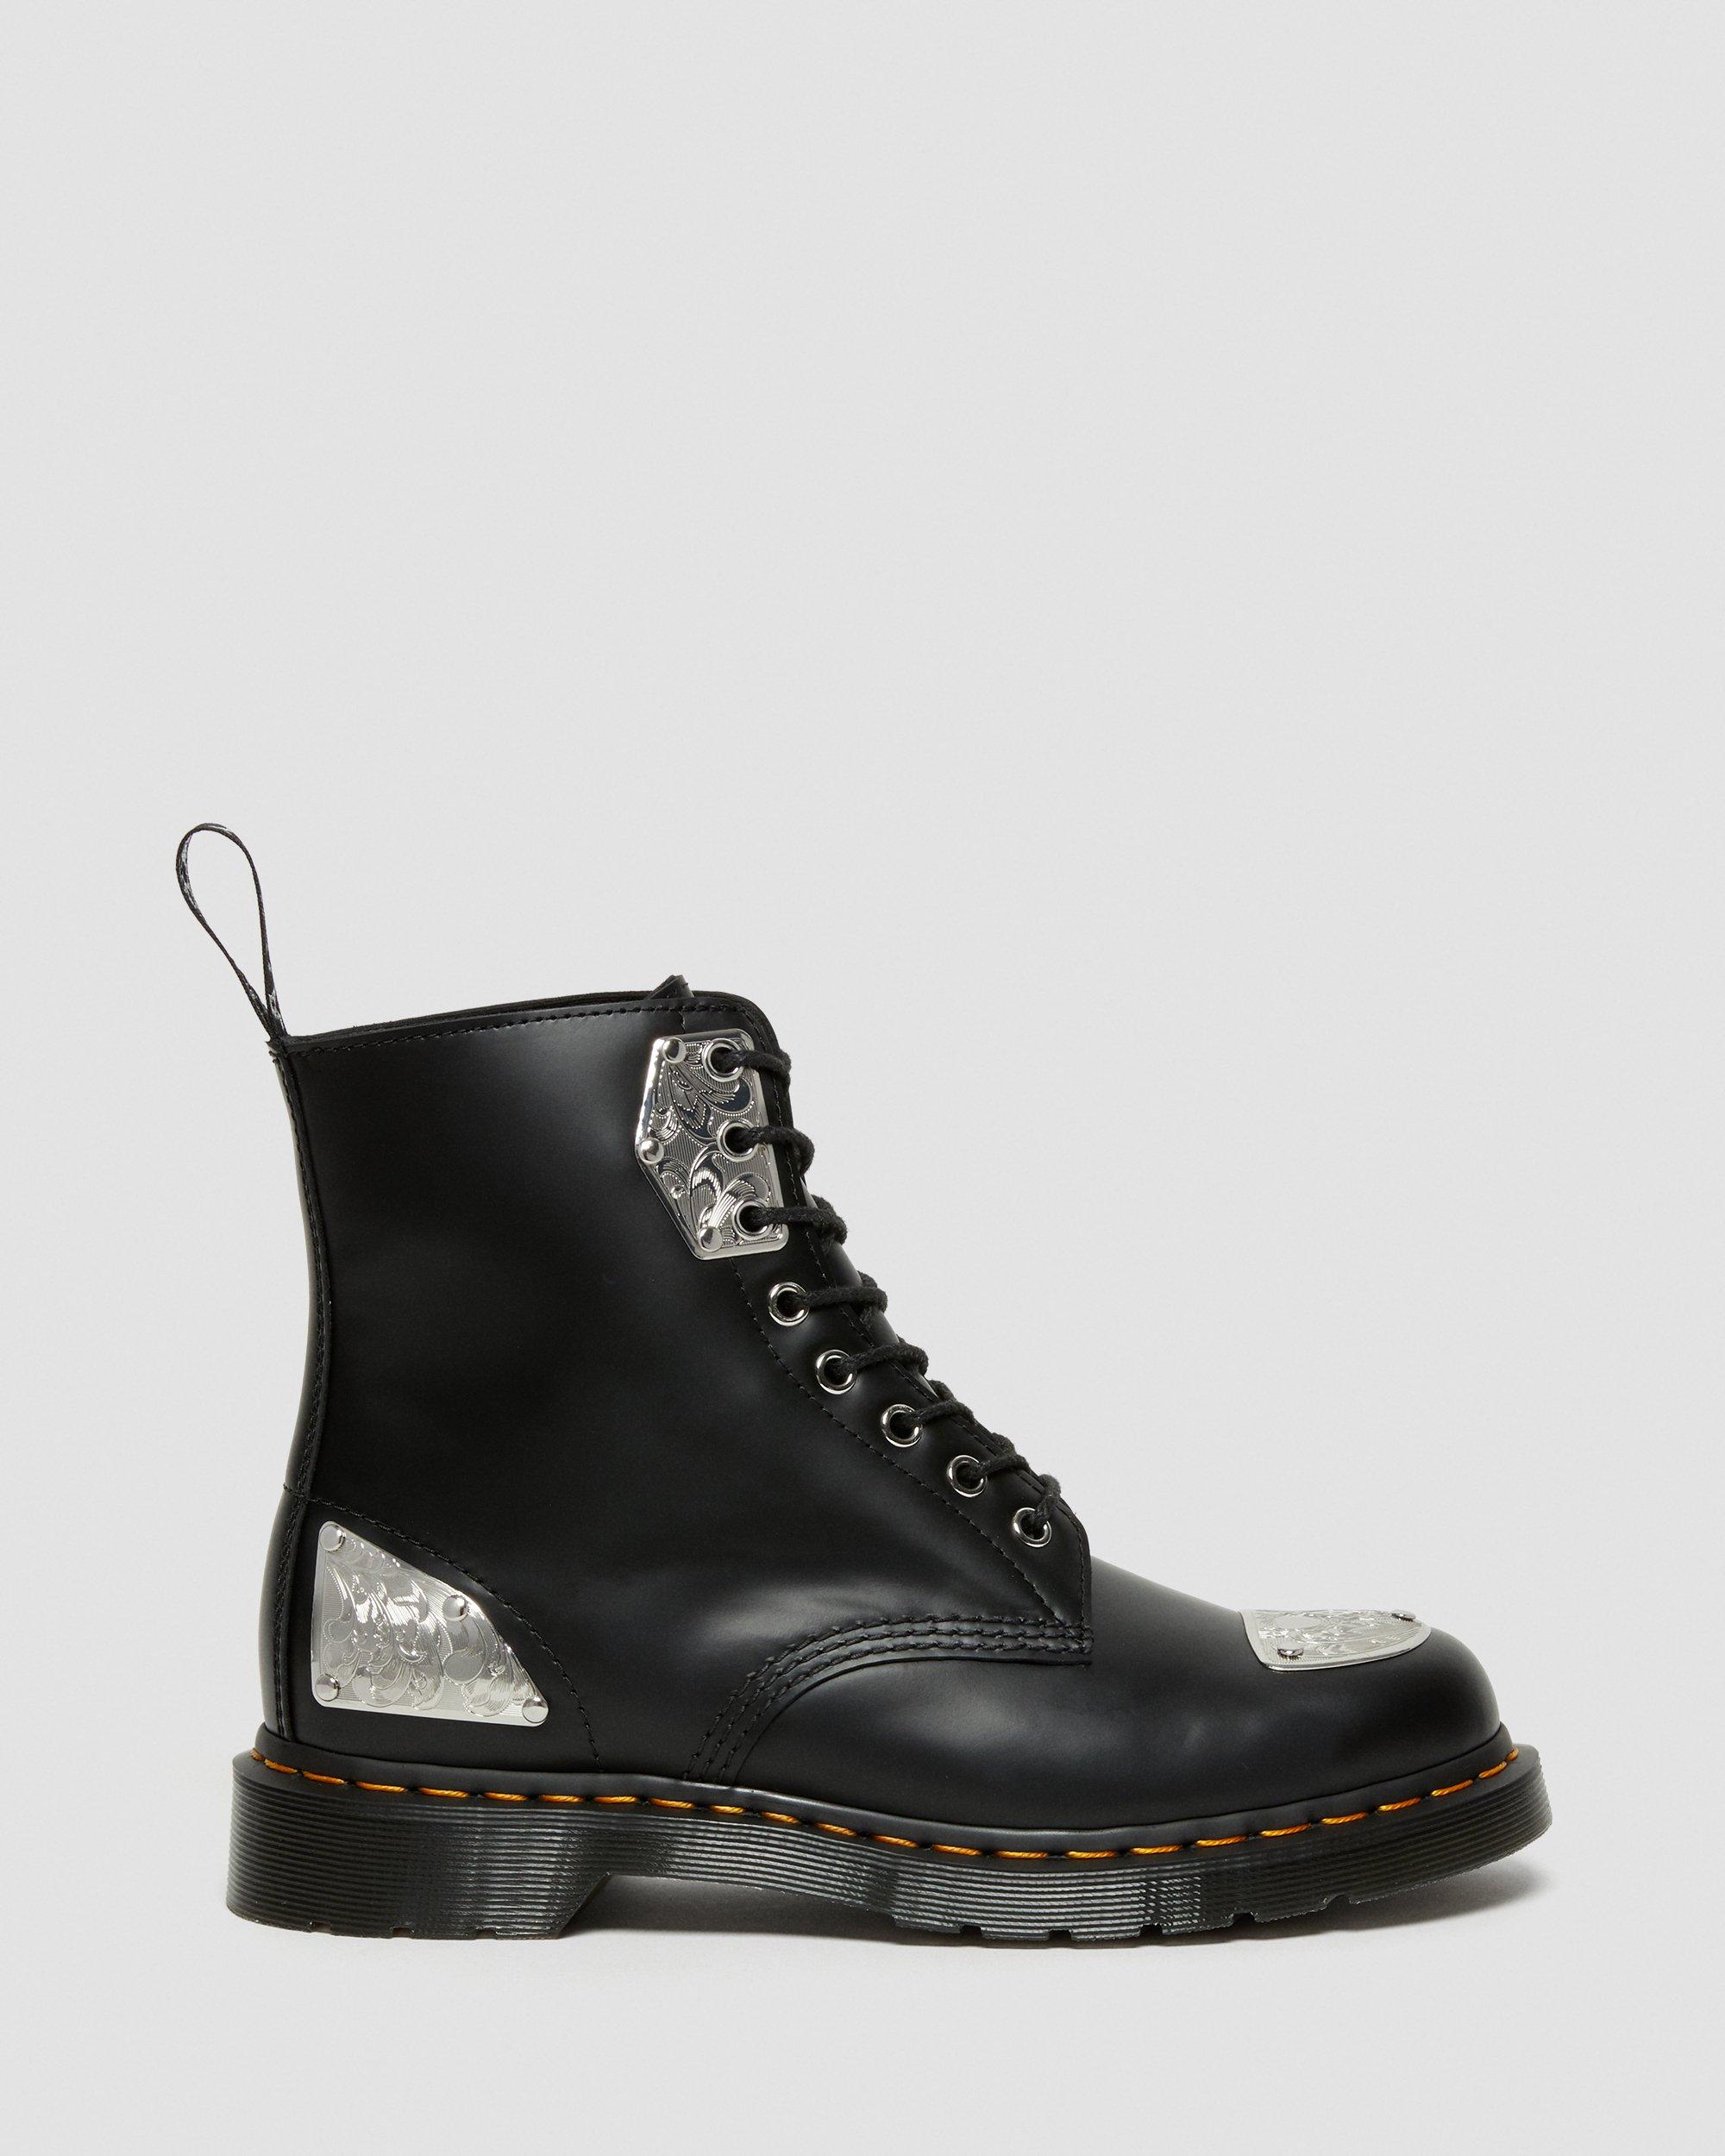 King Nerd 1460 Leather Lace Up Boots, Black | Dr. Martens